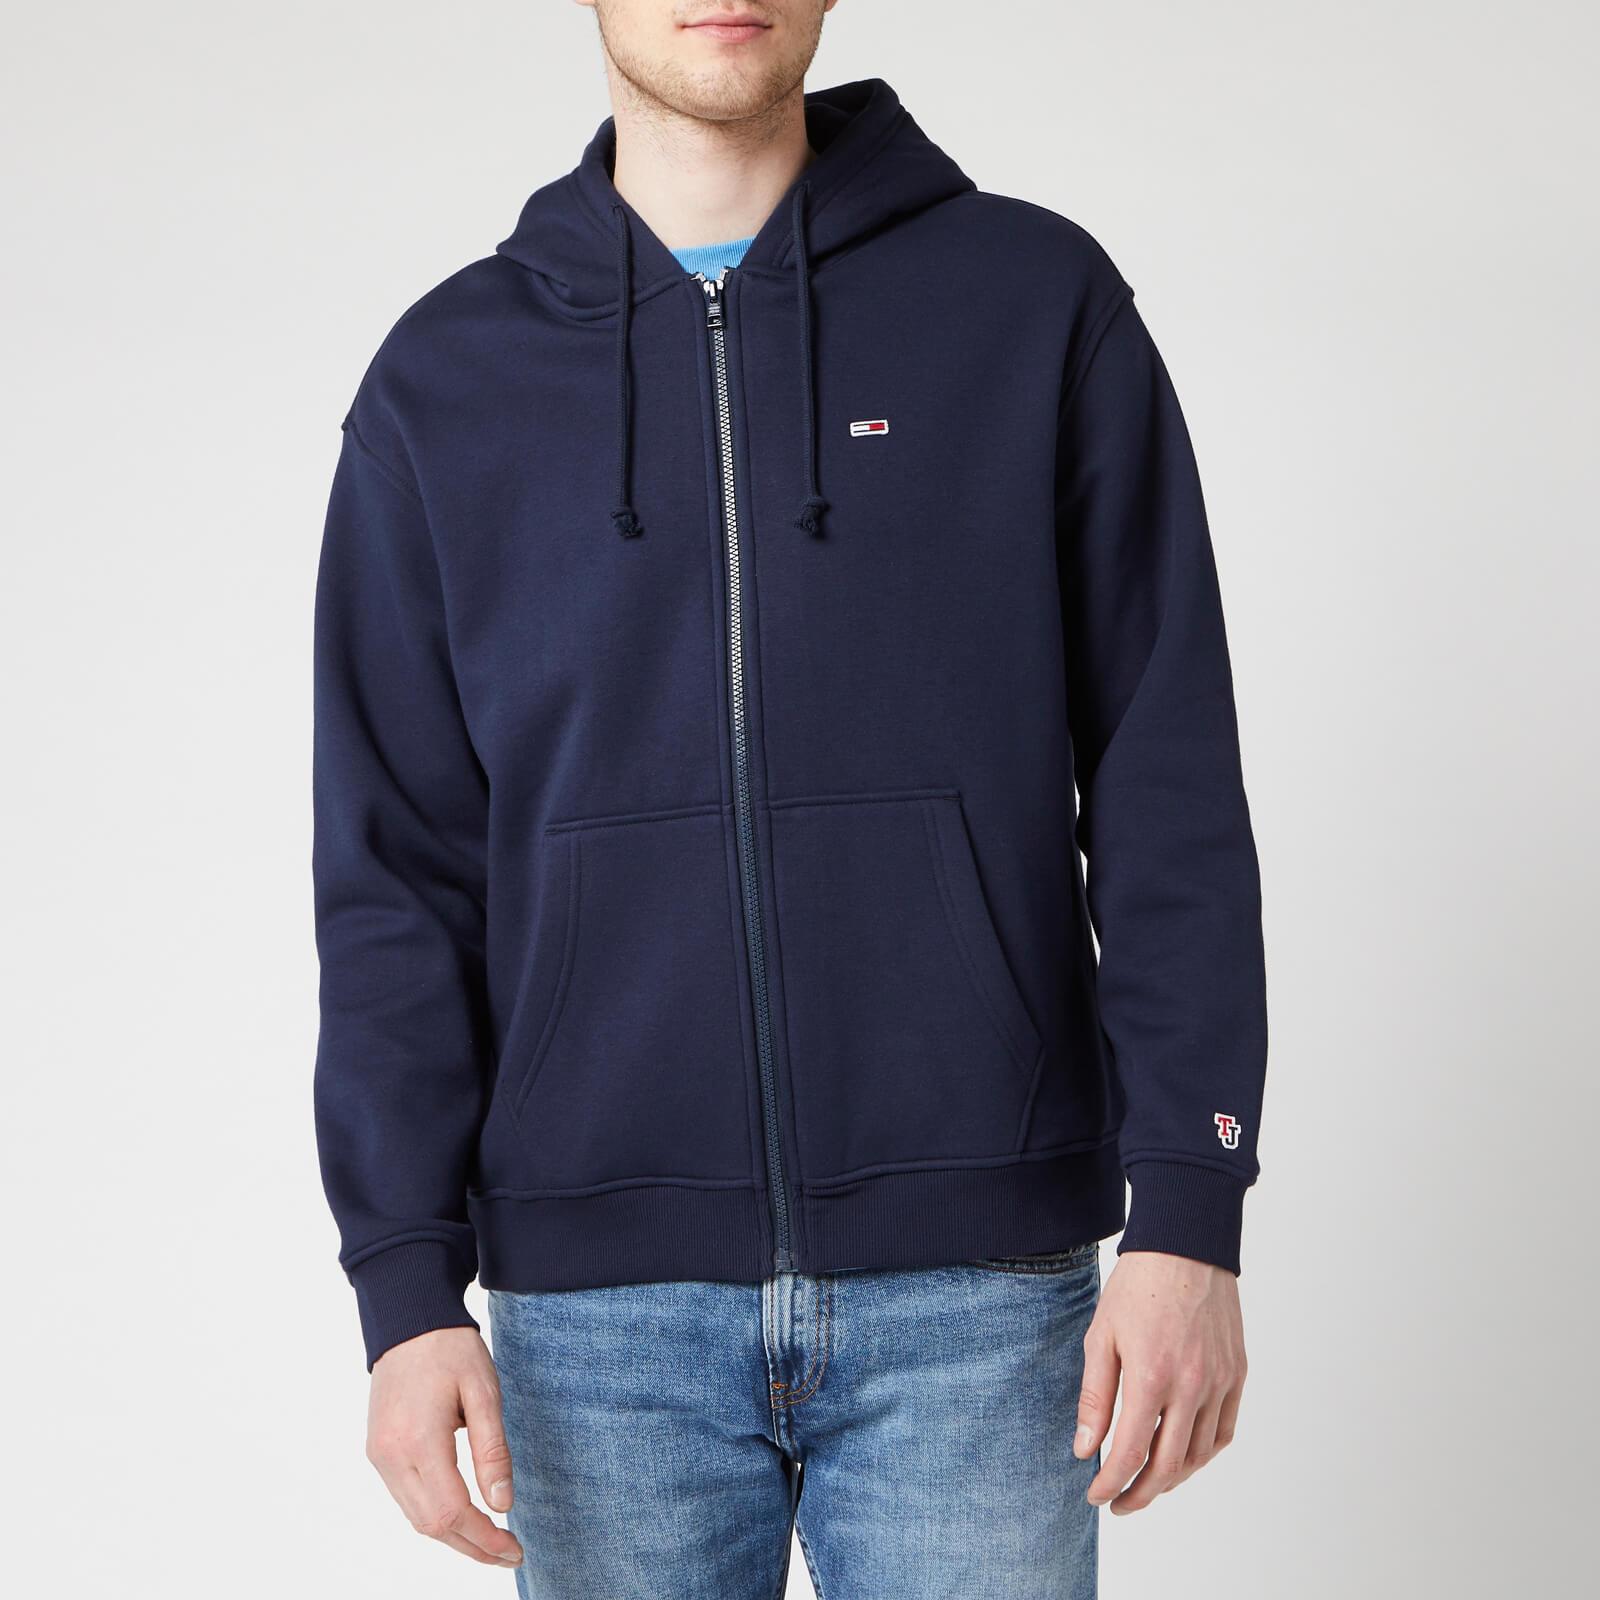 Tommy Hilfiger Classic Zip Through Hoodie in Blue for Men - Lyst